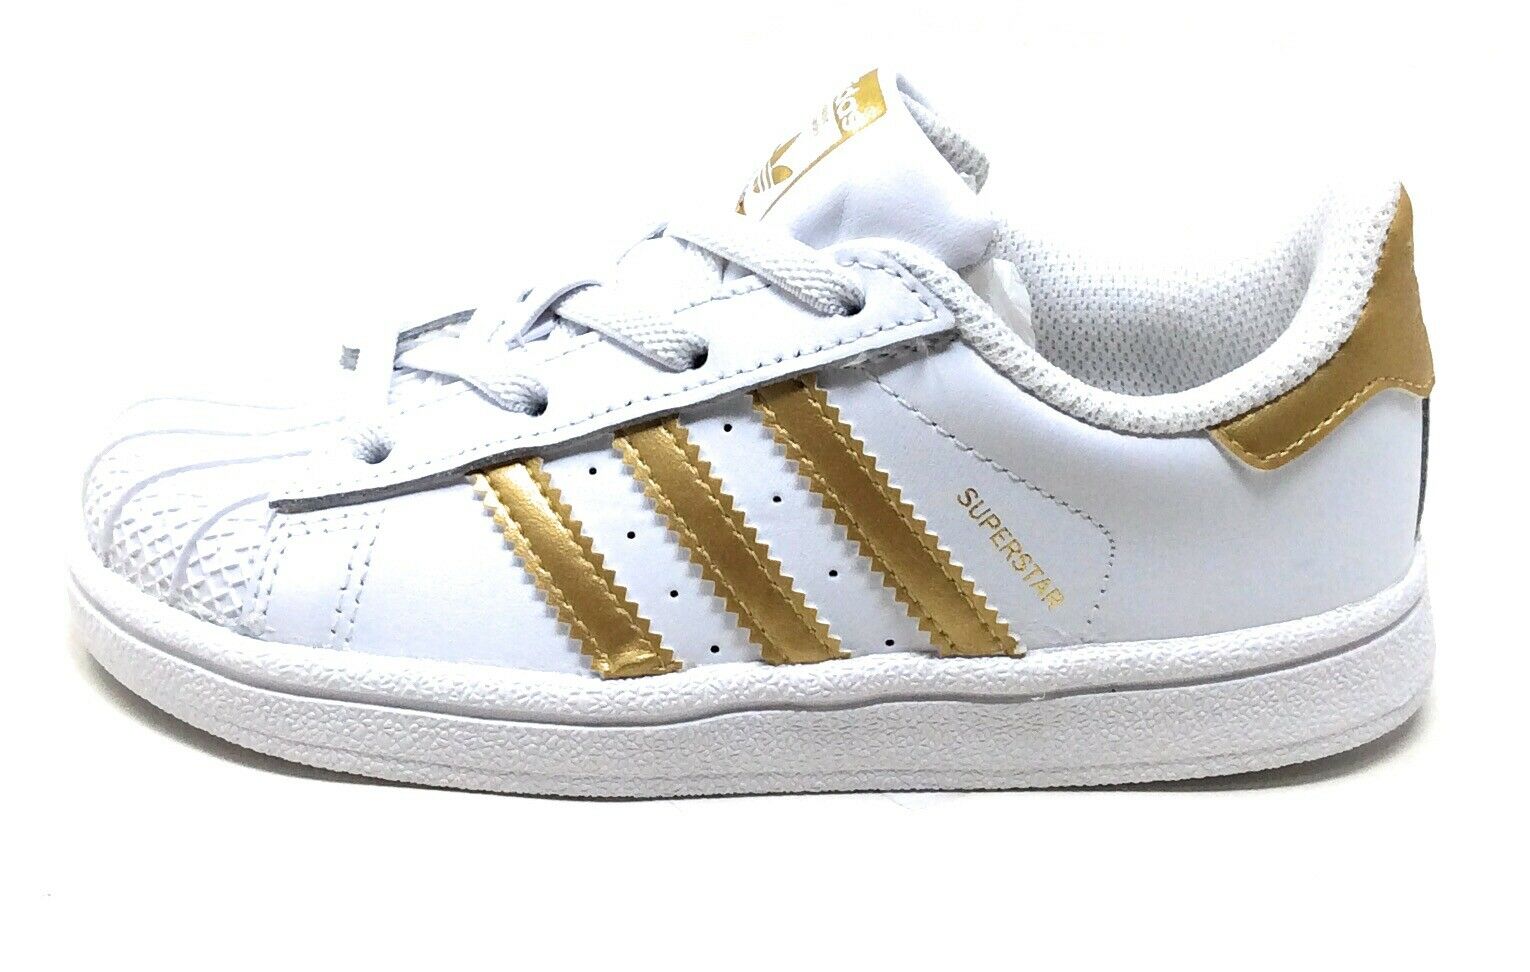 Adidas Little Boys Superstar I Classic Sneaker Shoes White Gold Size 8K